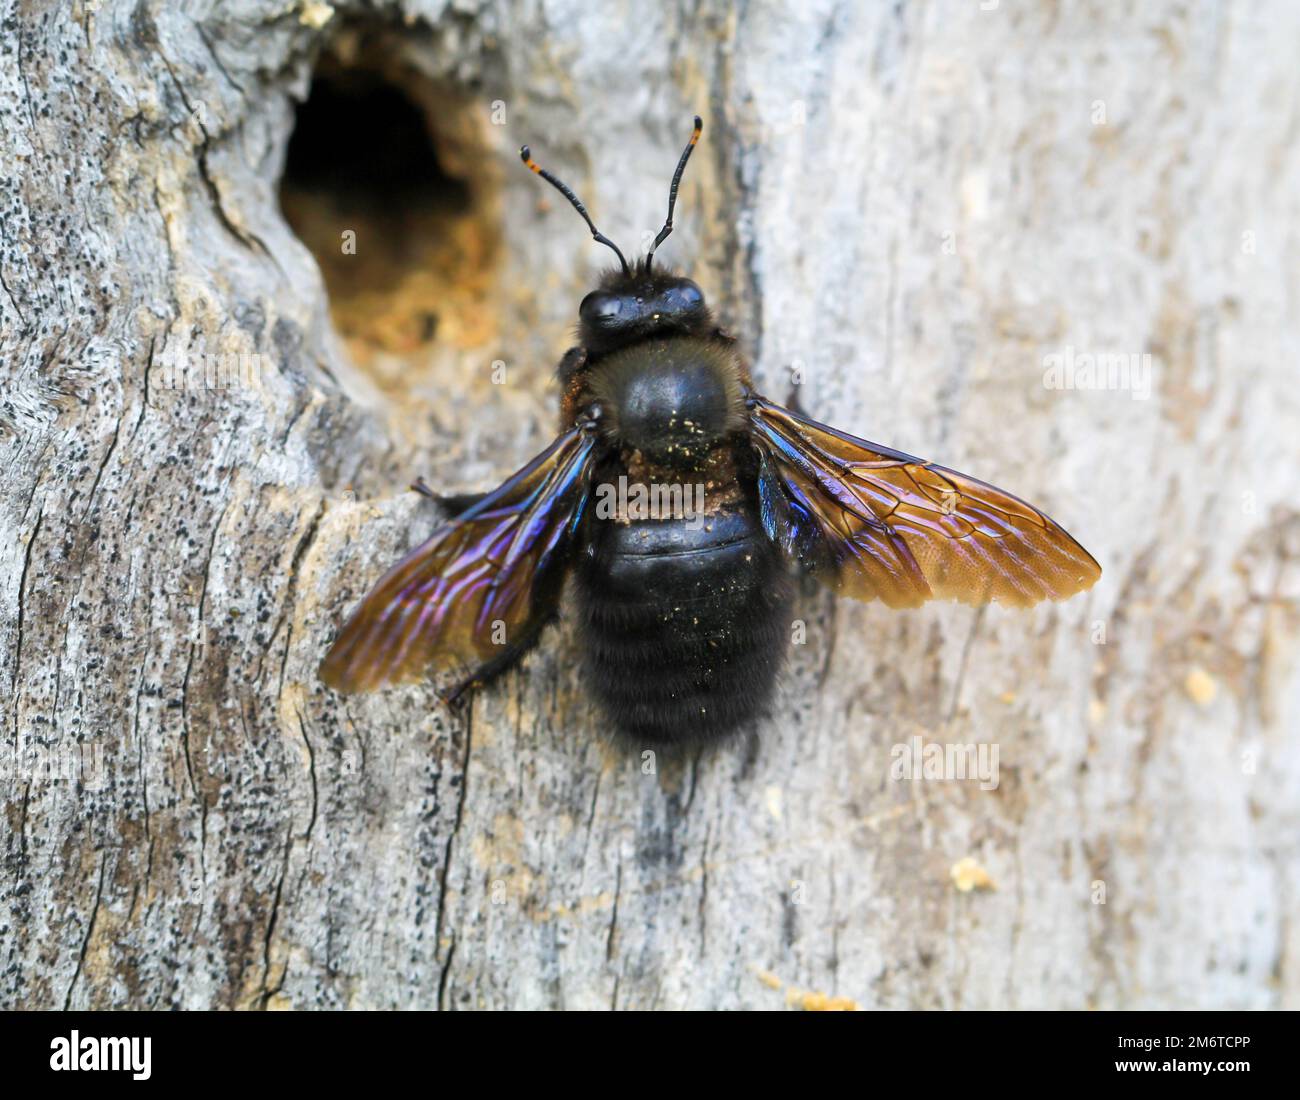 A blue-black wood bee (Xylocopa violacea) on a hollow tree trunk. Stock Photo